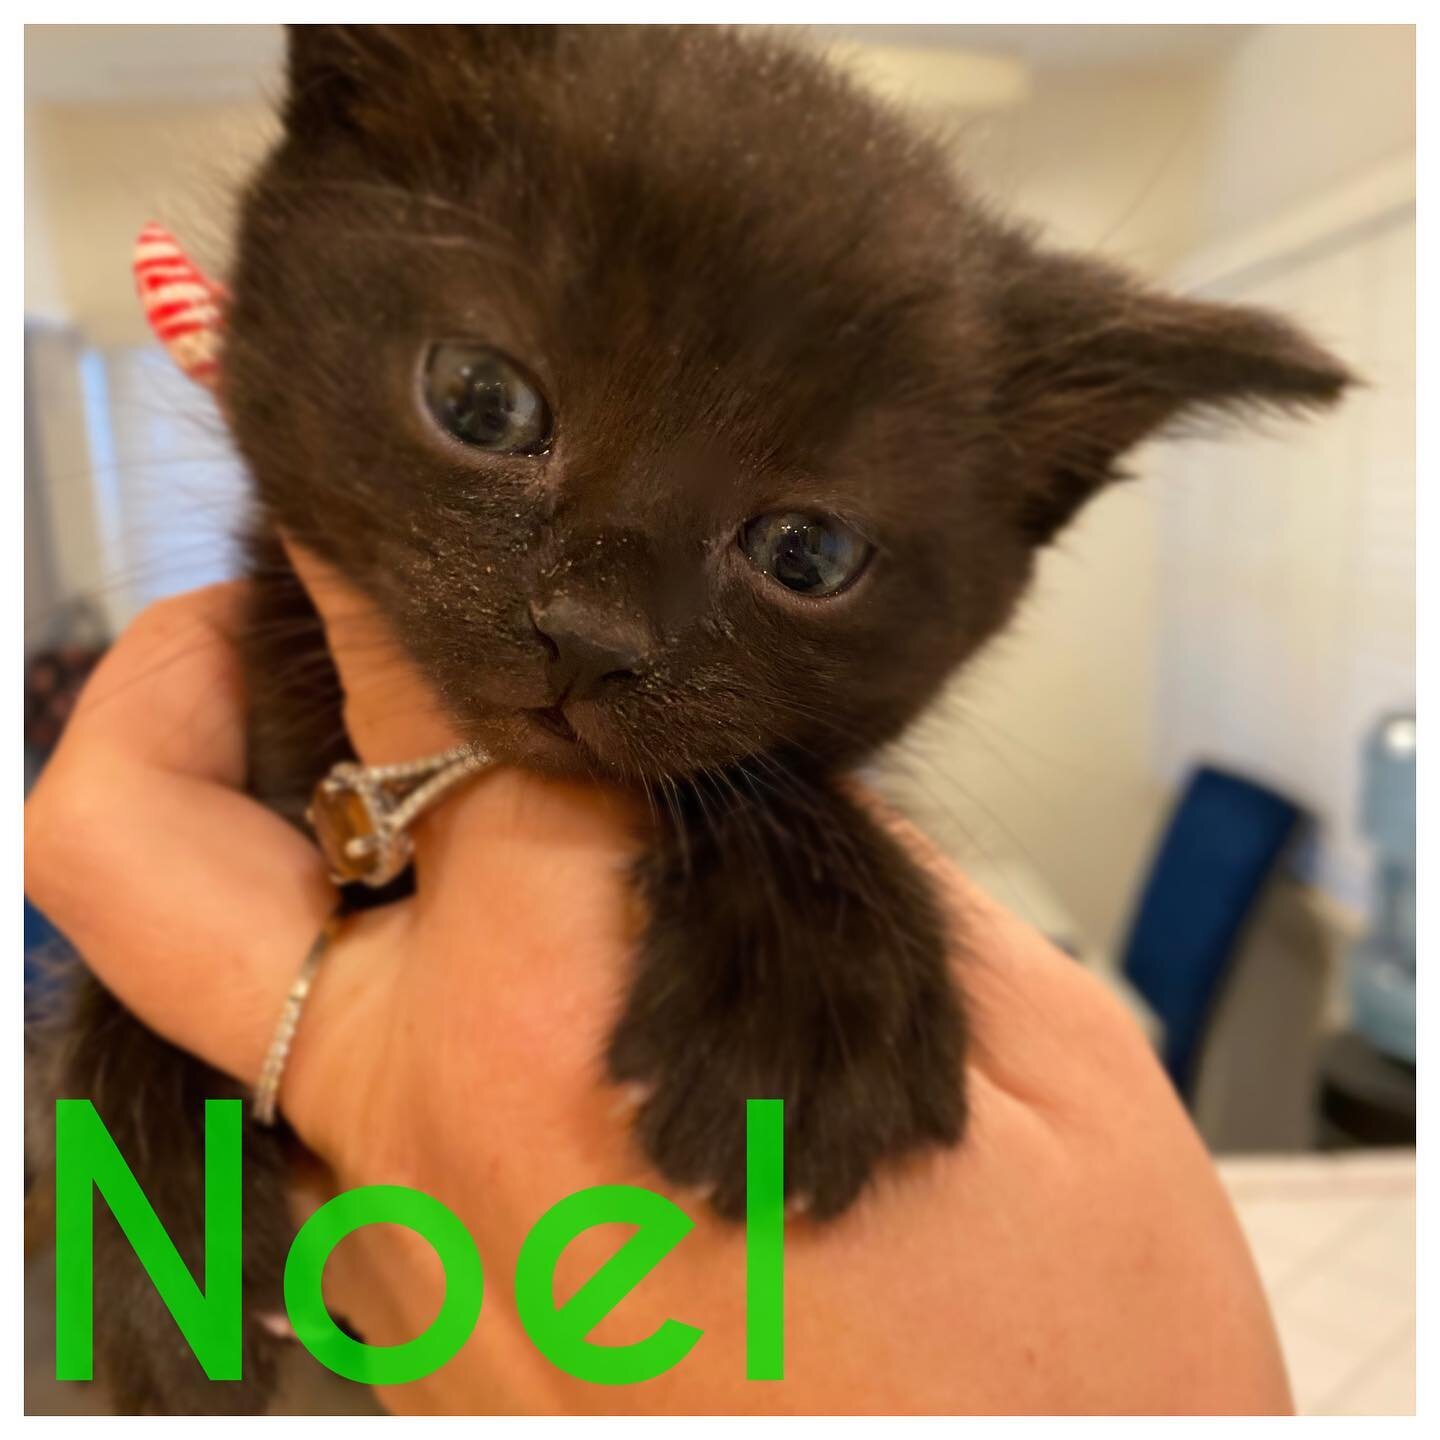 Name Announcement!! 
We have named the babies we rescued on Christmas Eve 🎄 of course we had to go Christmas-ish  names 😊 Introducing Noel, Merry and Christa , 4 1/2 weeks old and doing very well ❤️ #rescuekittens #fosterkittens #bottlebabies #baby